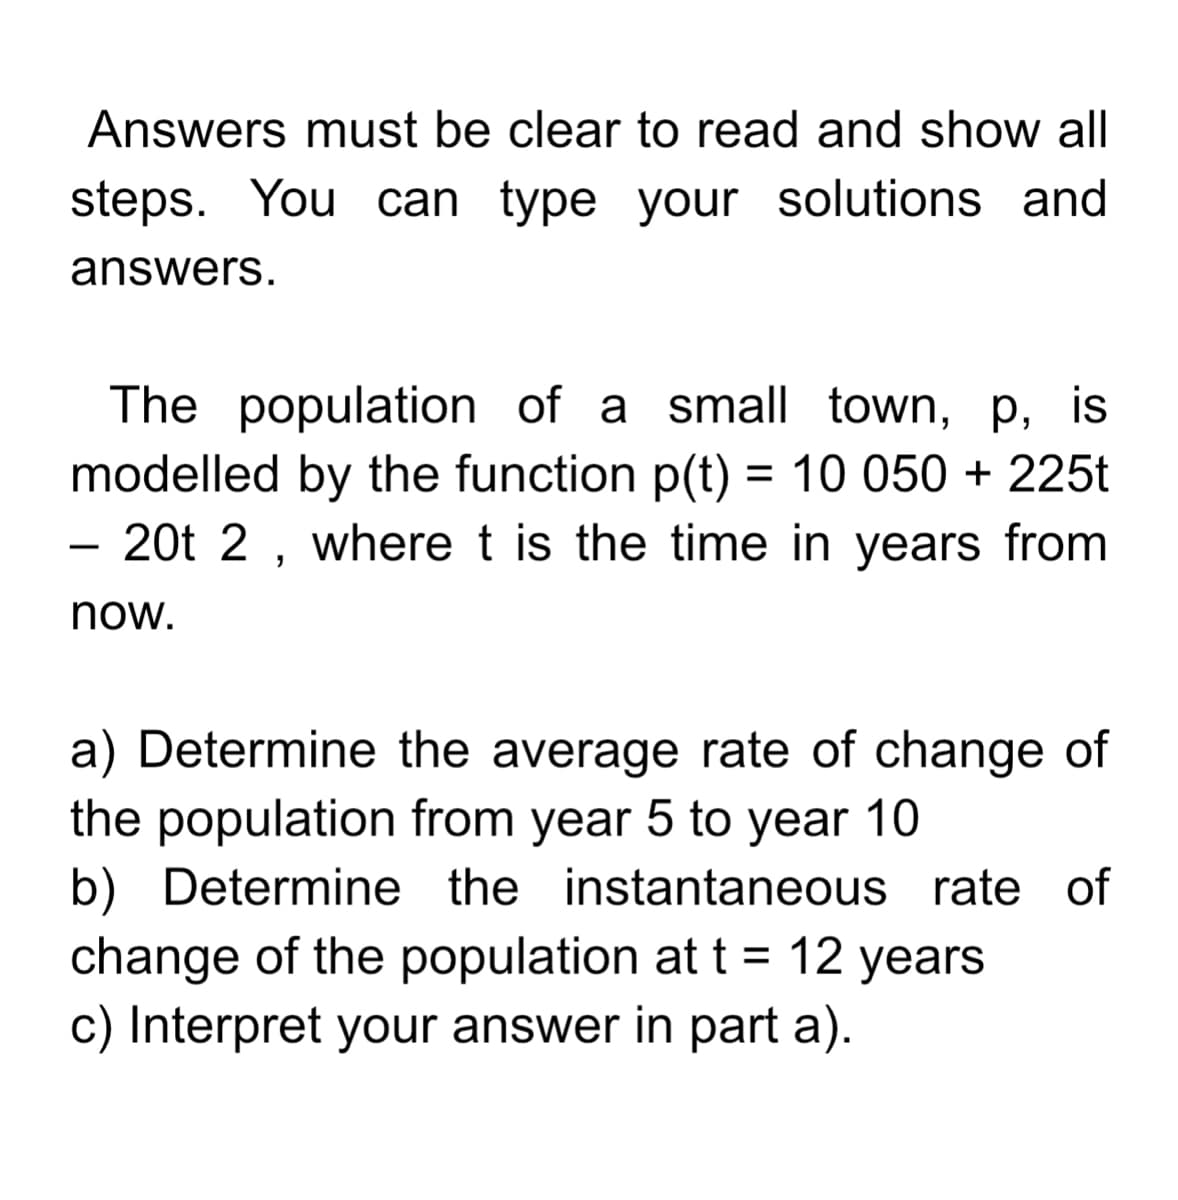 Answers must be clear to read and show all
steps. You can type your solutions and
answers.
The population of a small town, p, is
modelled by the function p(t) = 10 050 + 225t
20t 2 , where t is the time in years from
now.
a) Determine the average rate of change of
the population from year 5 to year 10
b) Determine the instantaneous rate of
change of the population at t= 12 years
c) Interpret your answer in part a).
